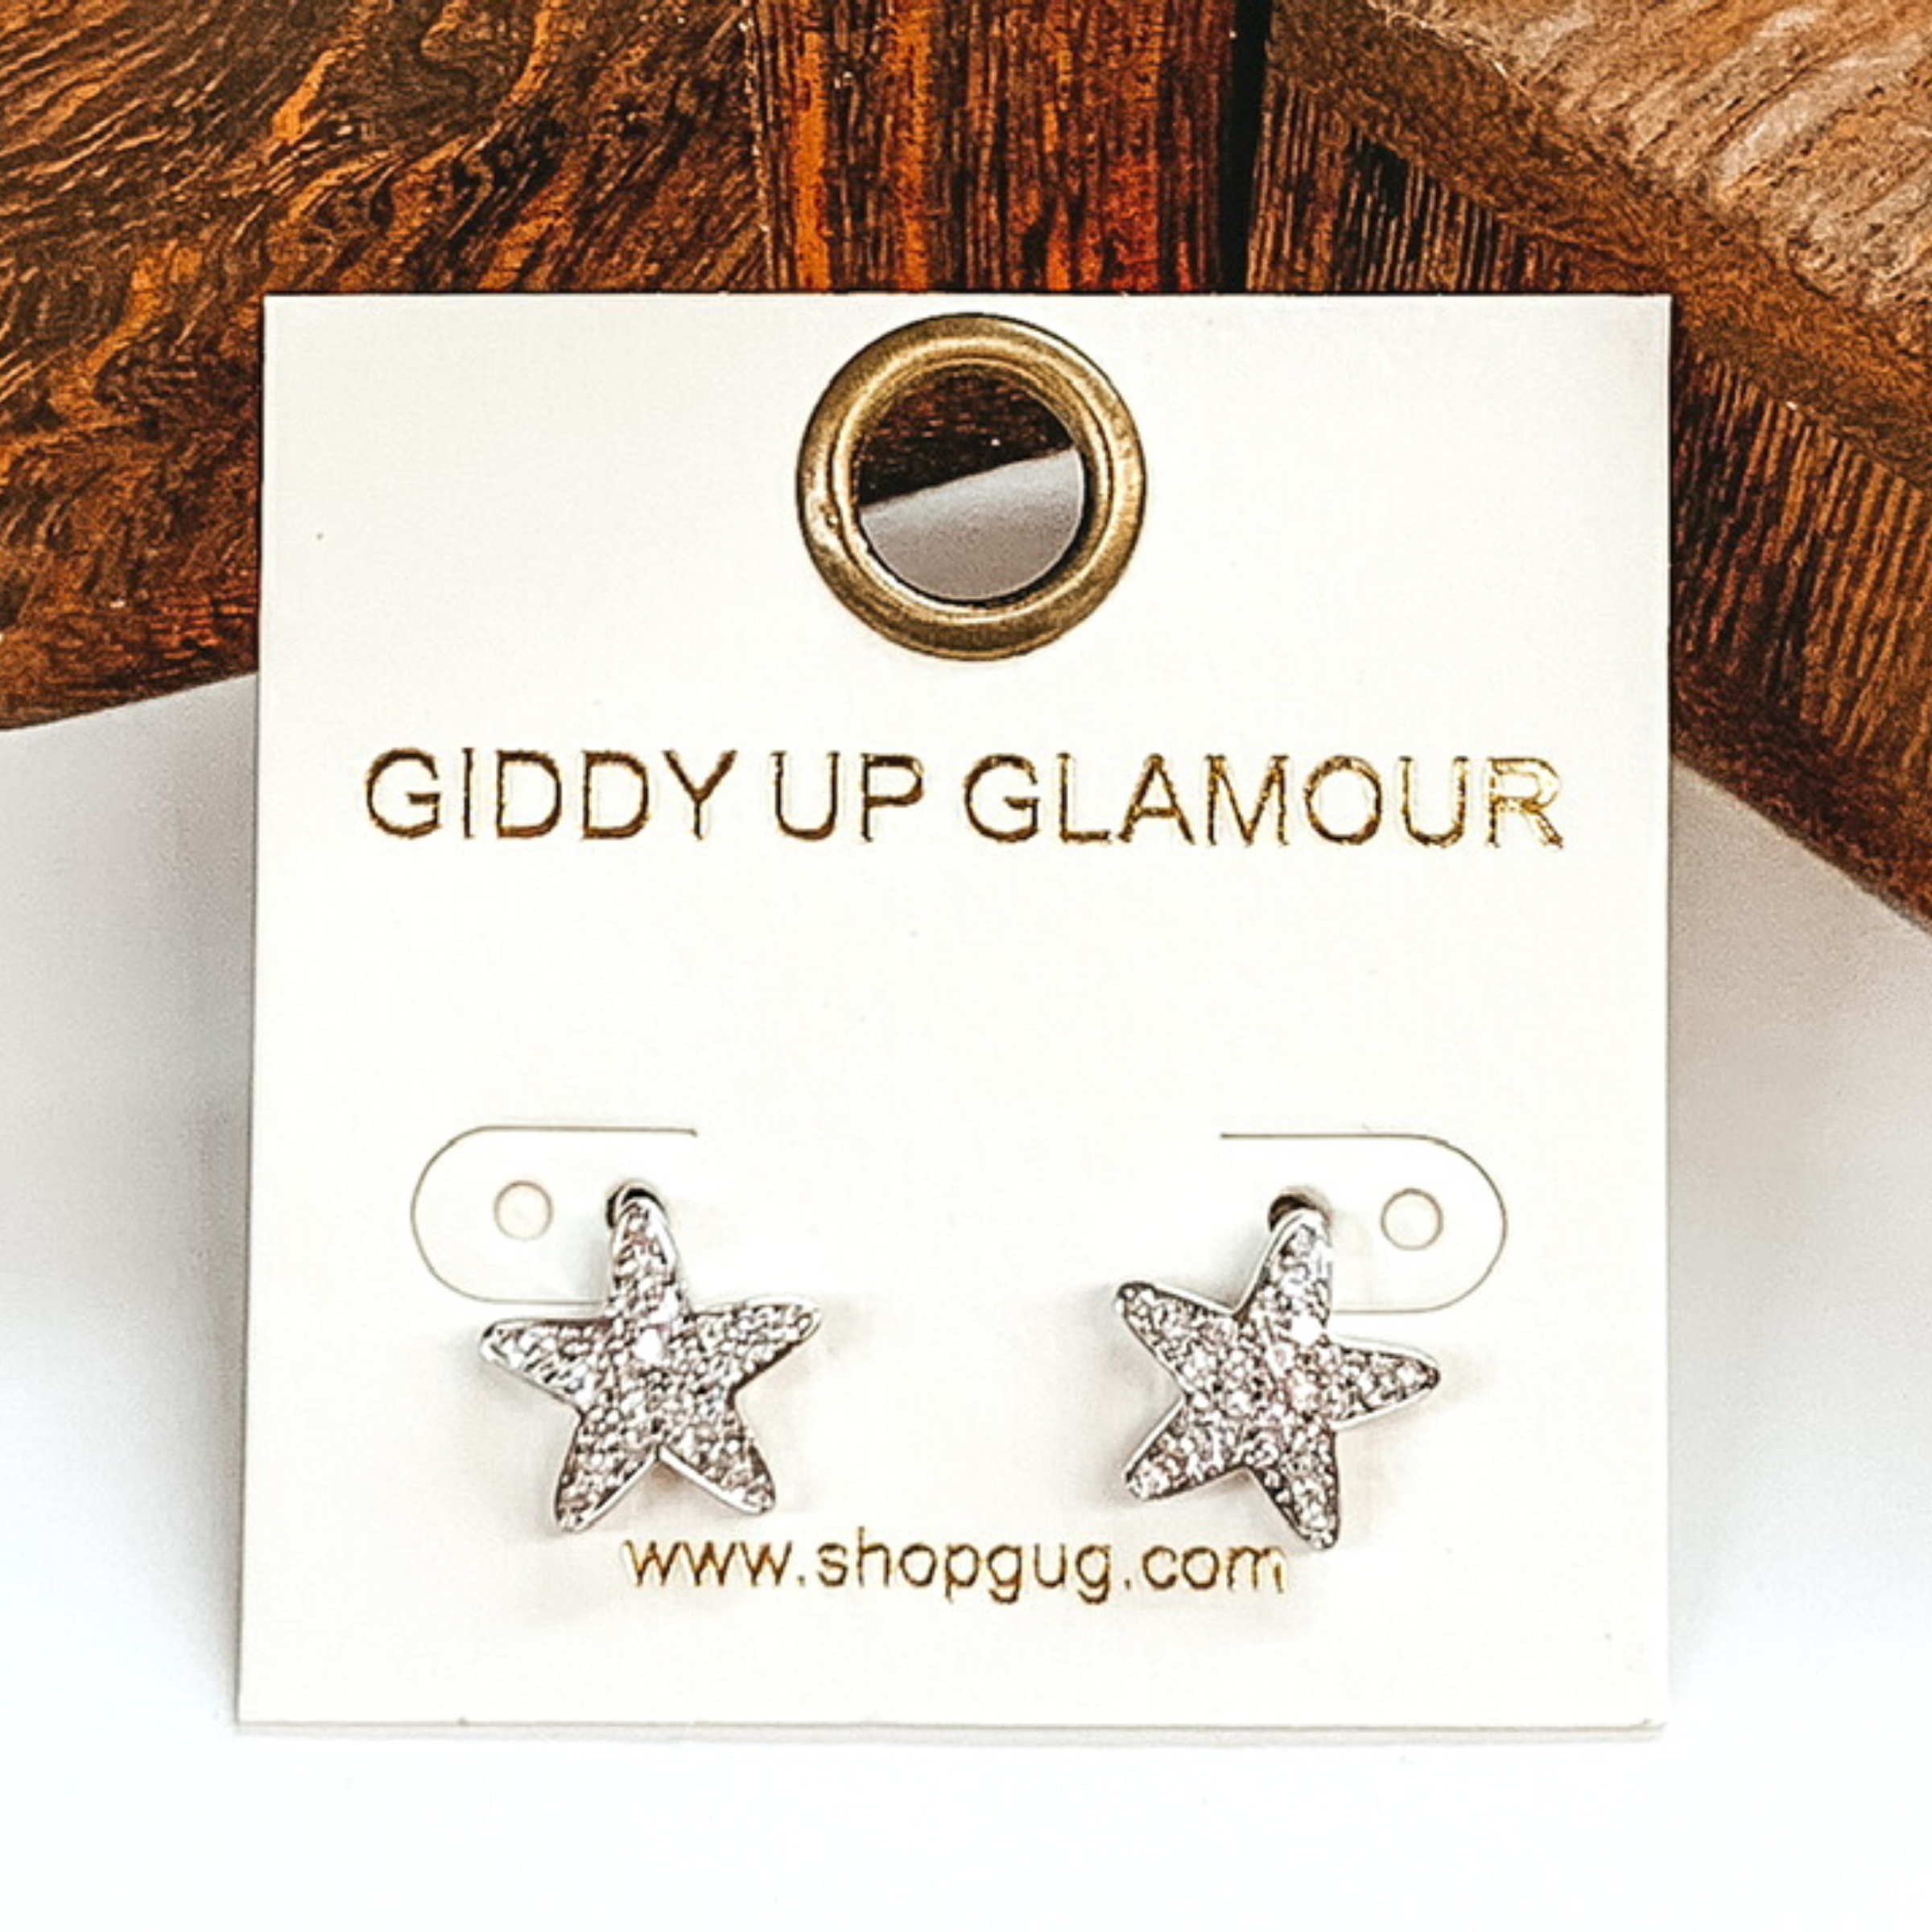 Small, silver star shaped stud earrings with clear crystals. These earrings are pictured on a white earrings card on a white and brown background.